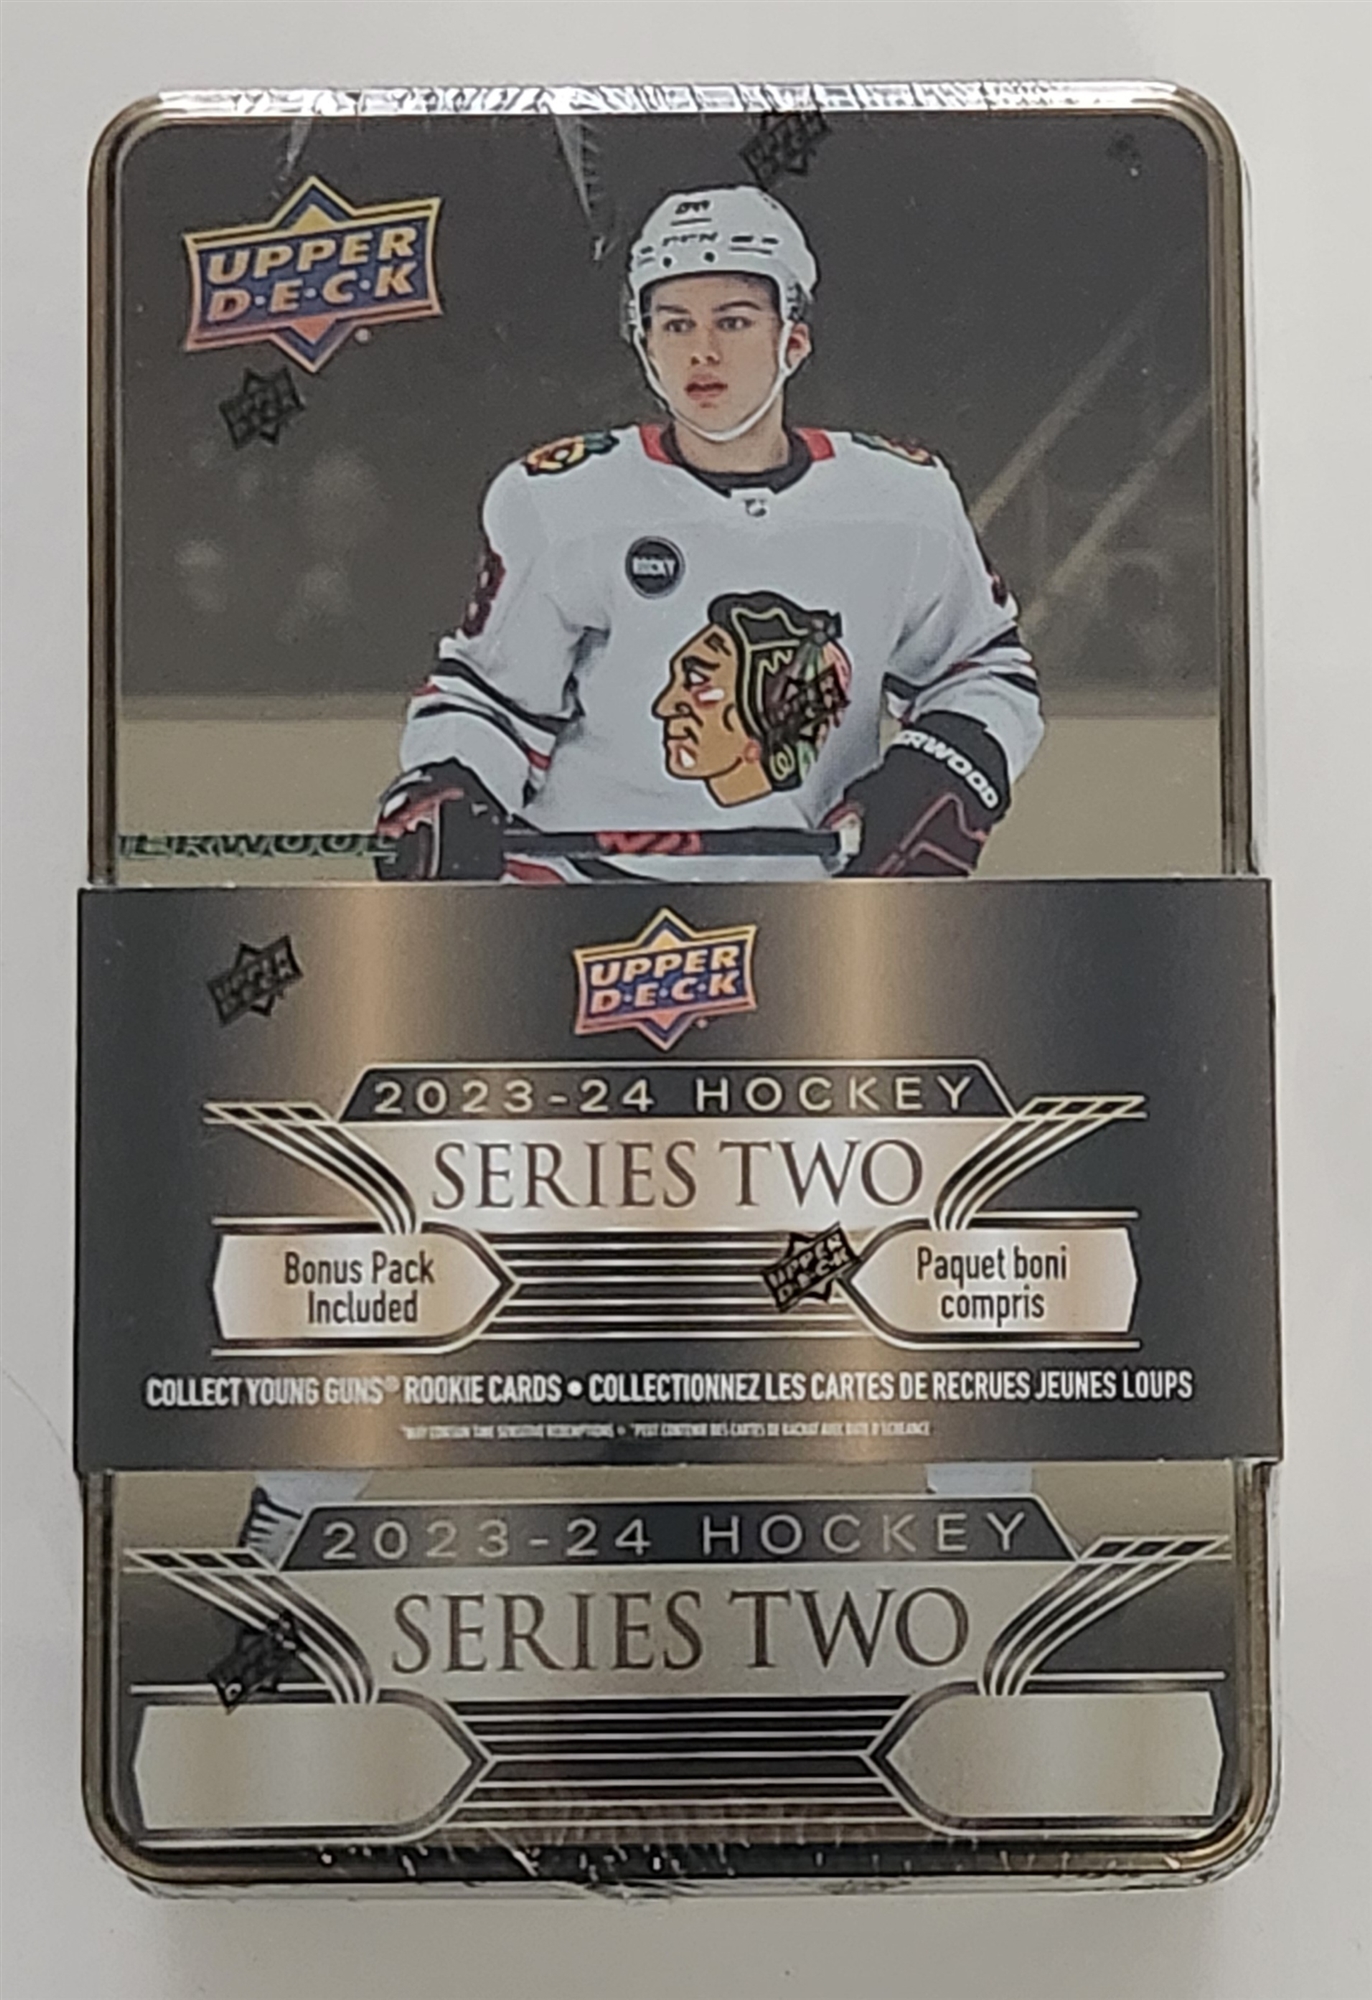 2023-24 Upper Deck Series 2 Trading Cards Sealed Tin Possible (Bedard Rookie)